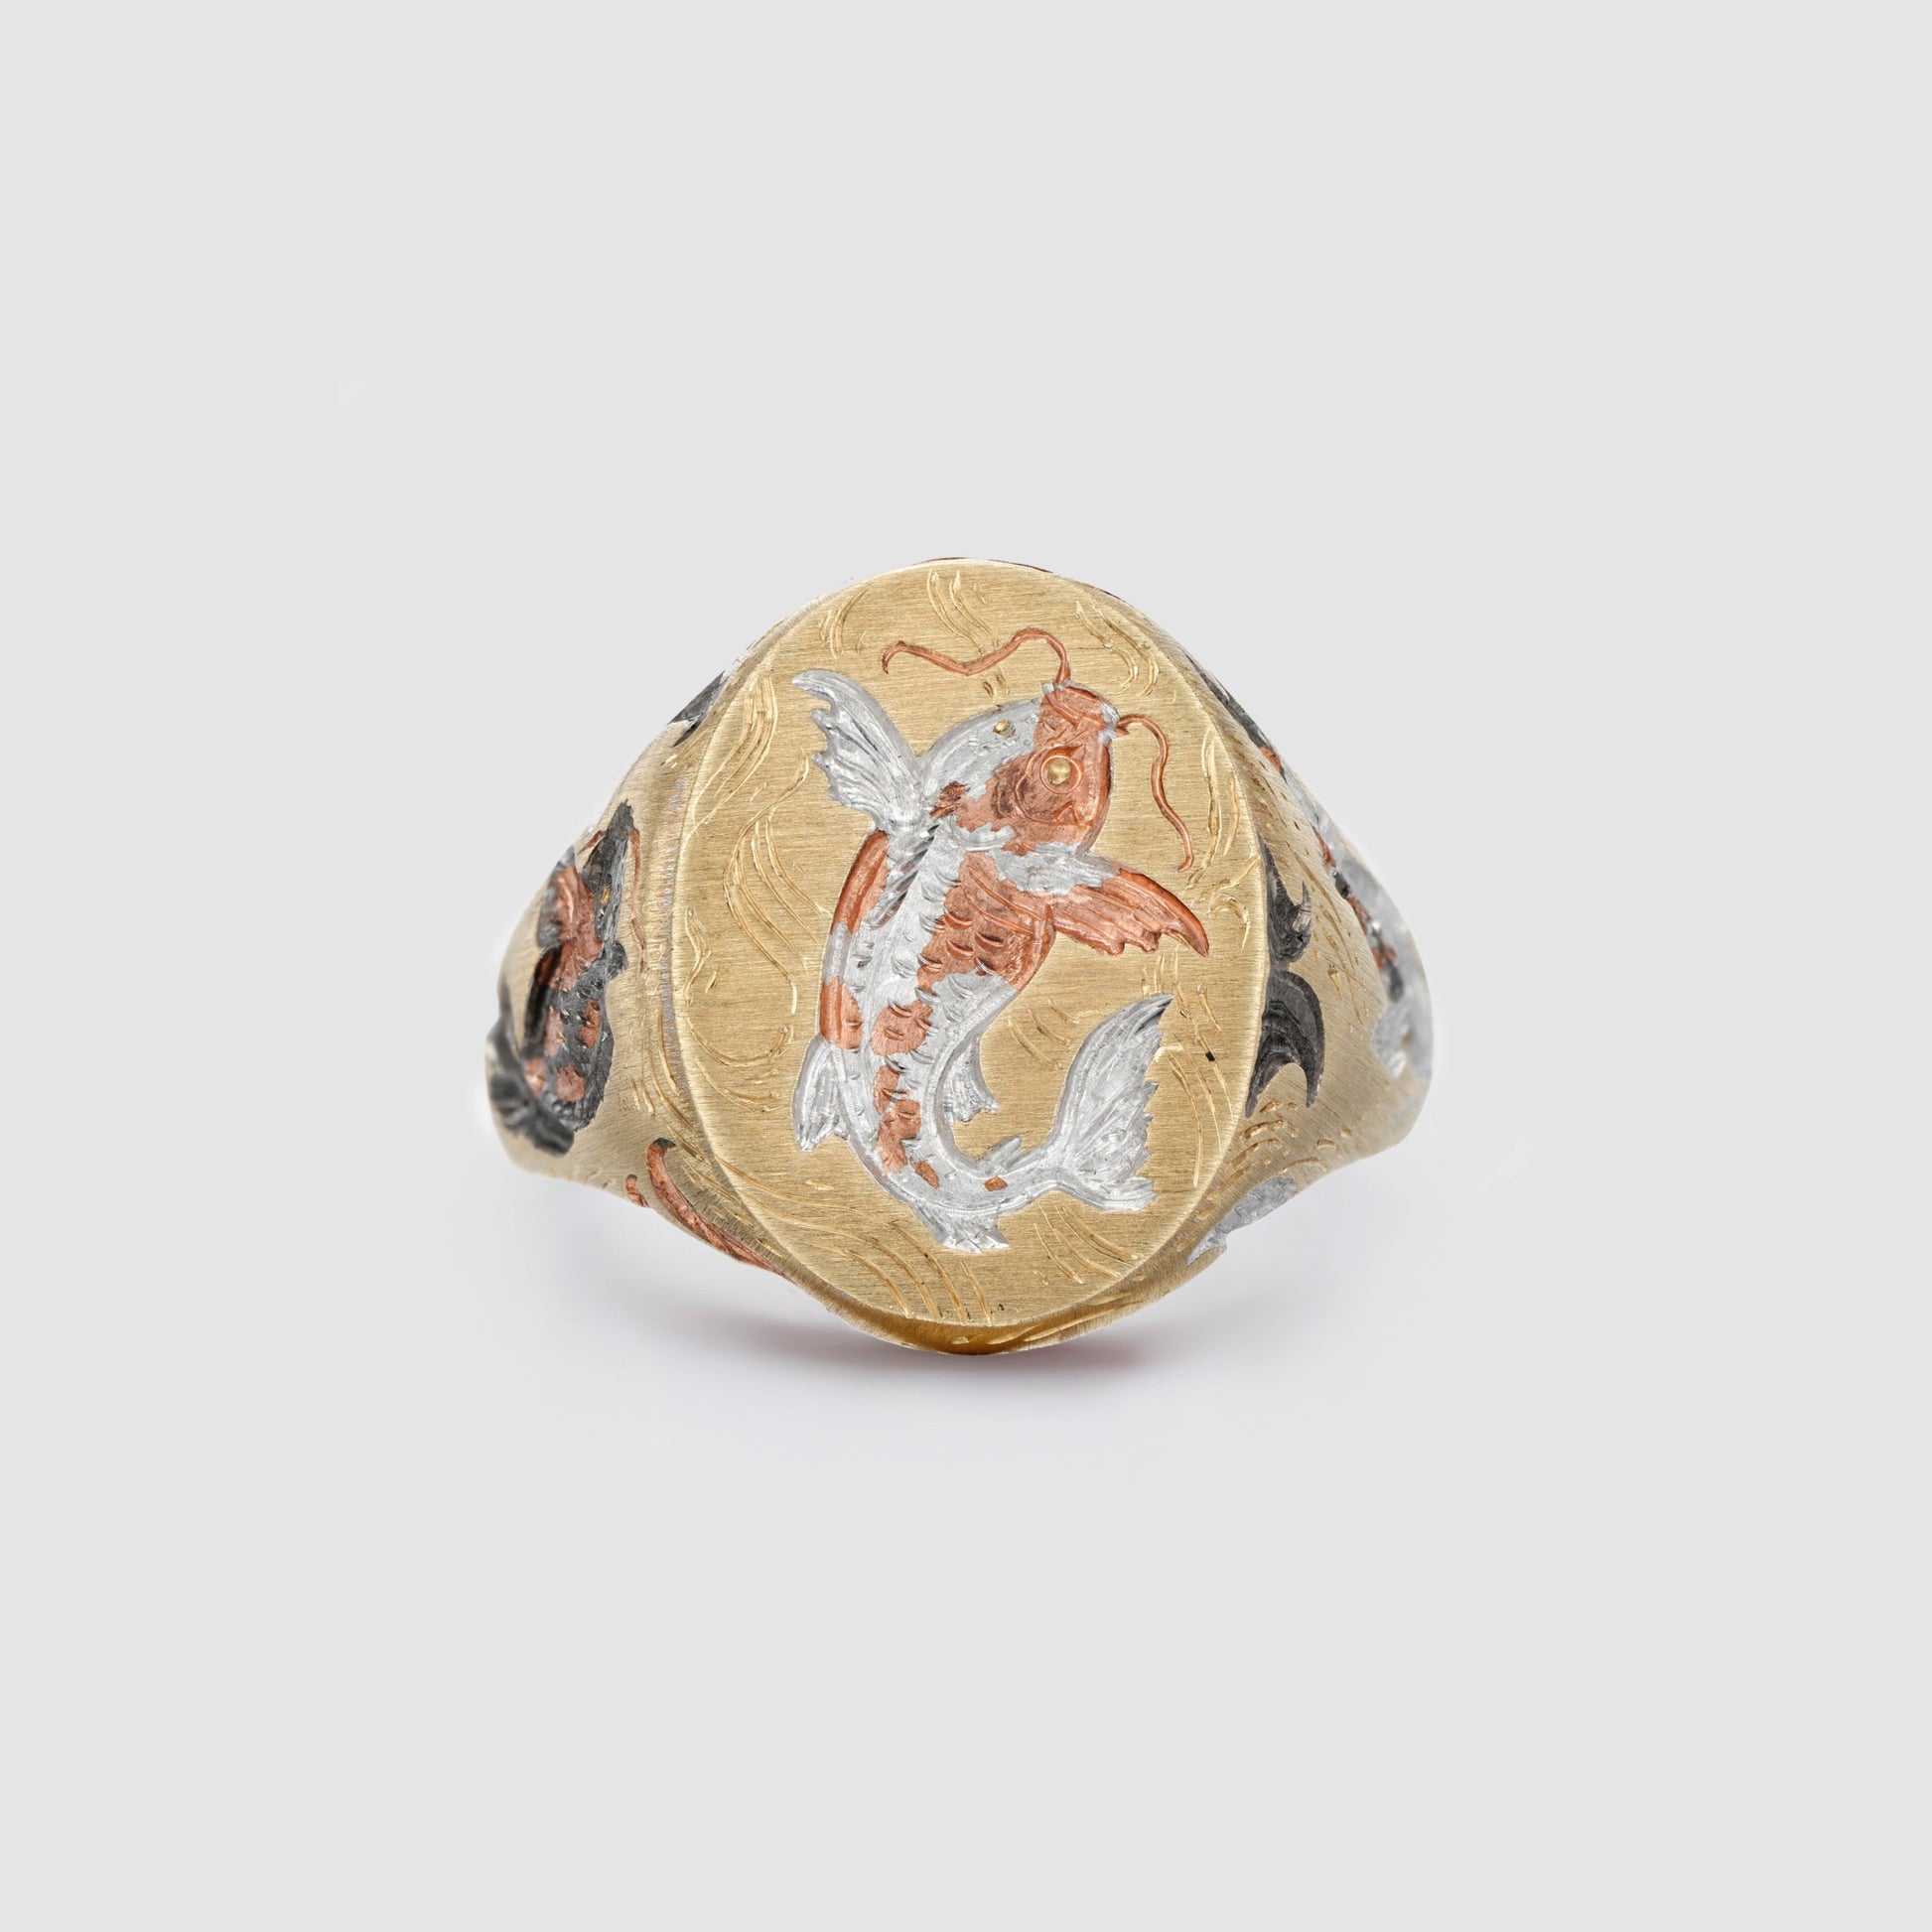 Castro Smith Jewelry Gold Koi Carp Signet Ring with Engravings.Castro Smith Gold Signet Ring. Carp Signet ring with e=hand engraved carps throughout the ring. The ring has wave and water engraved details. 